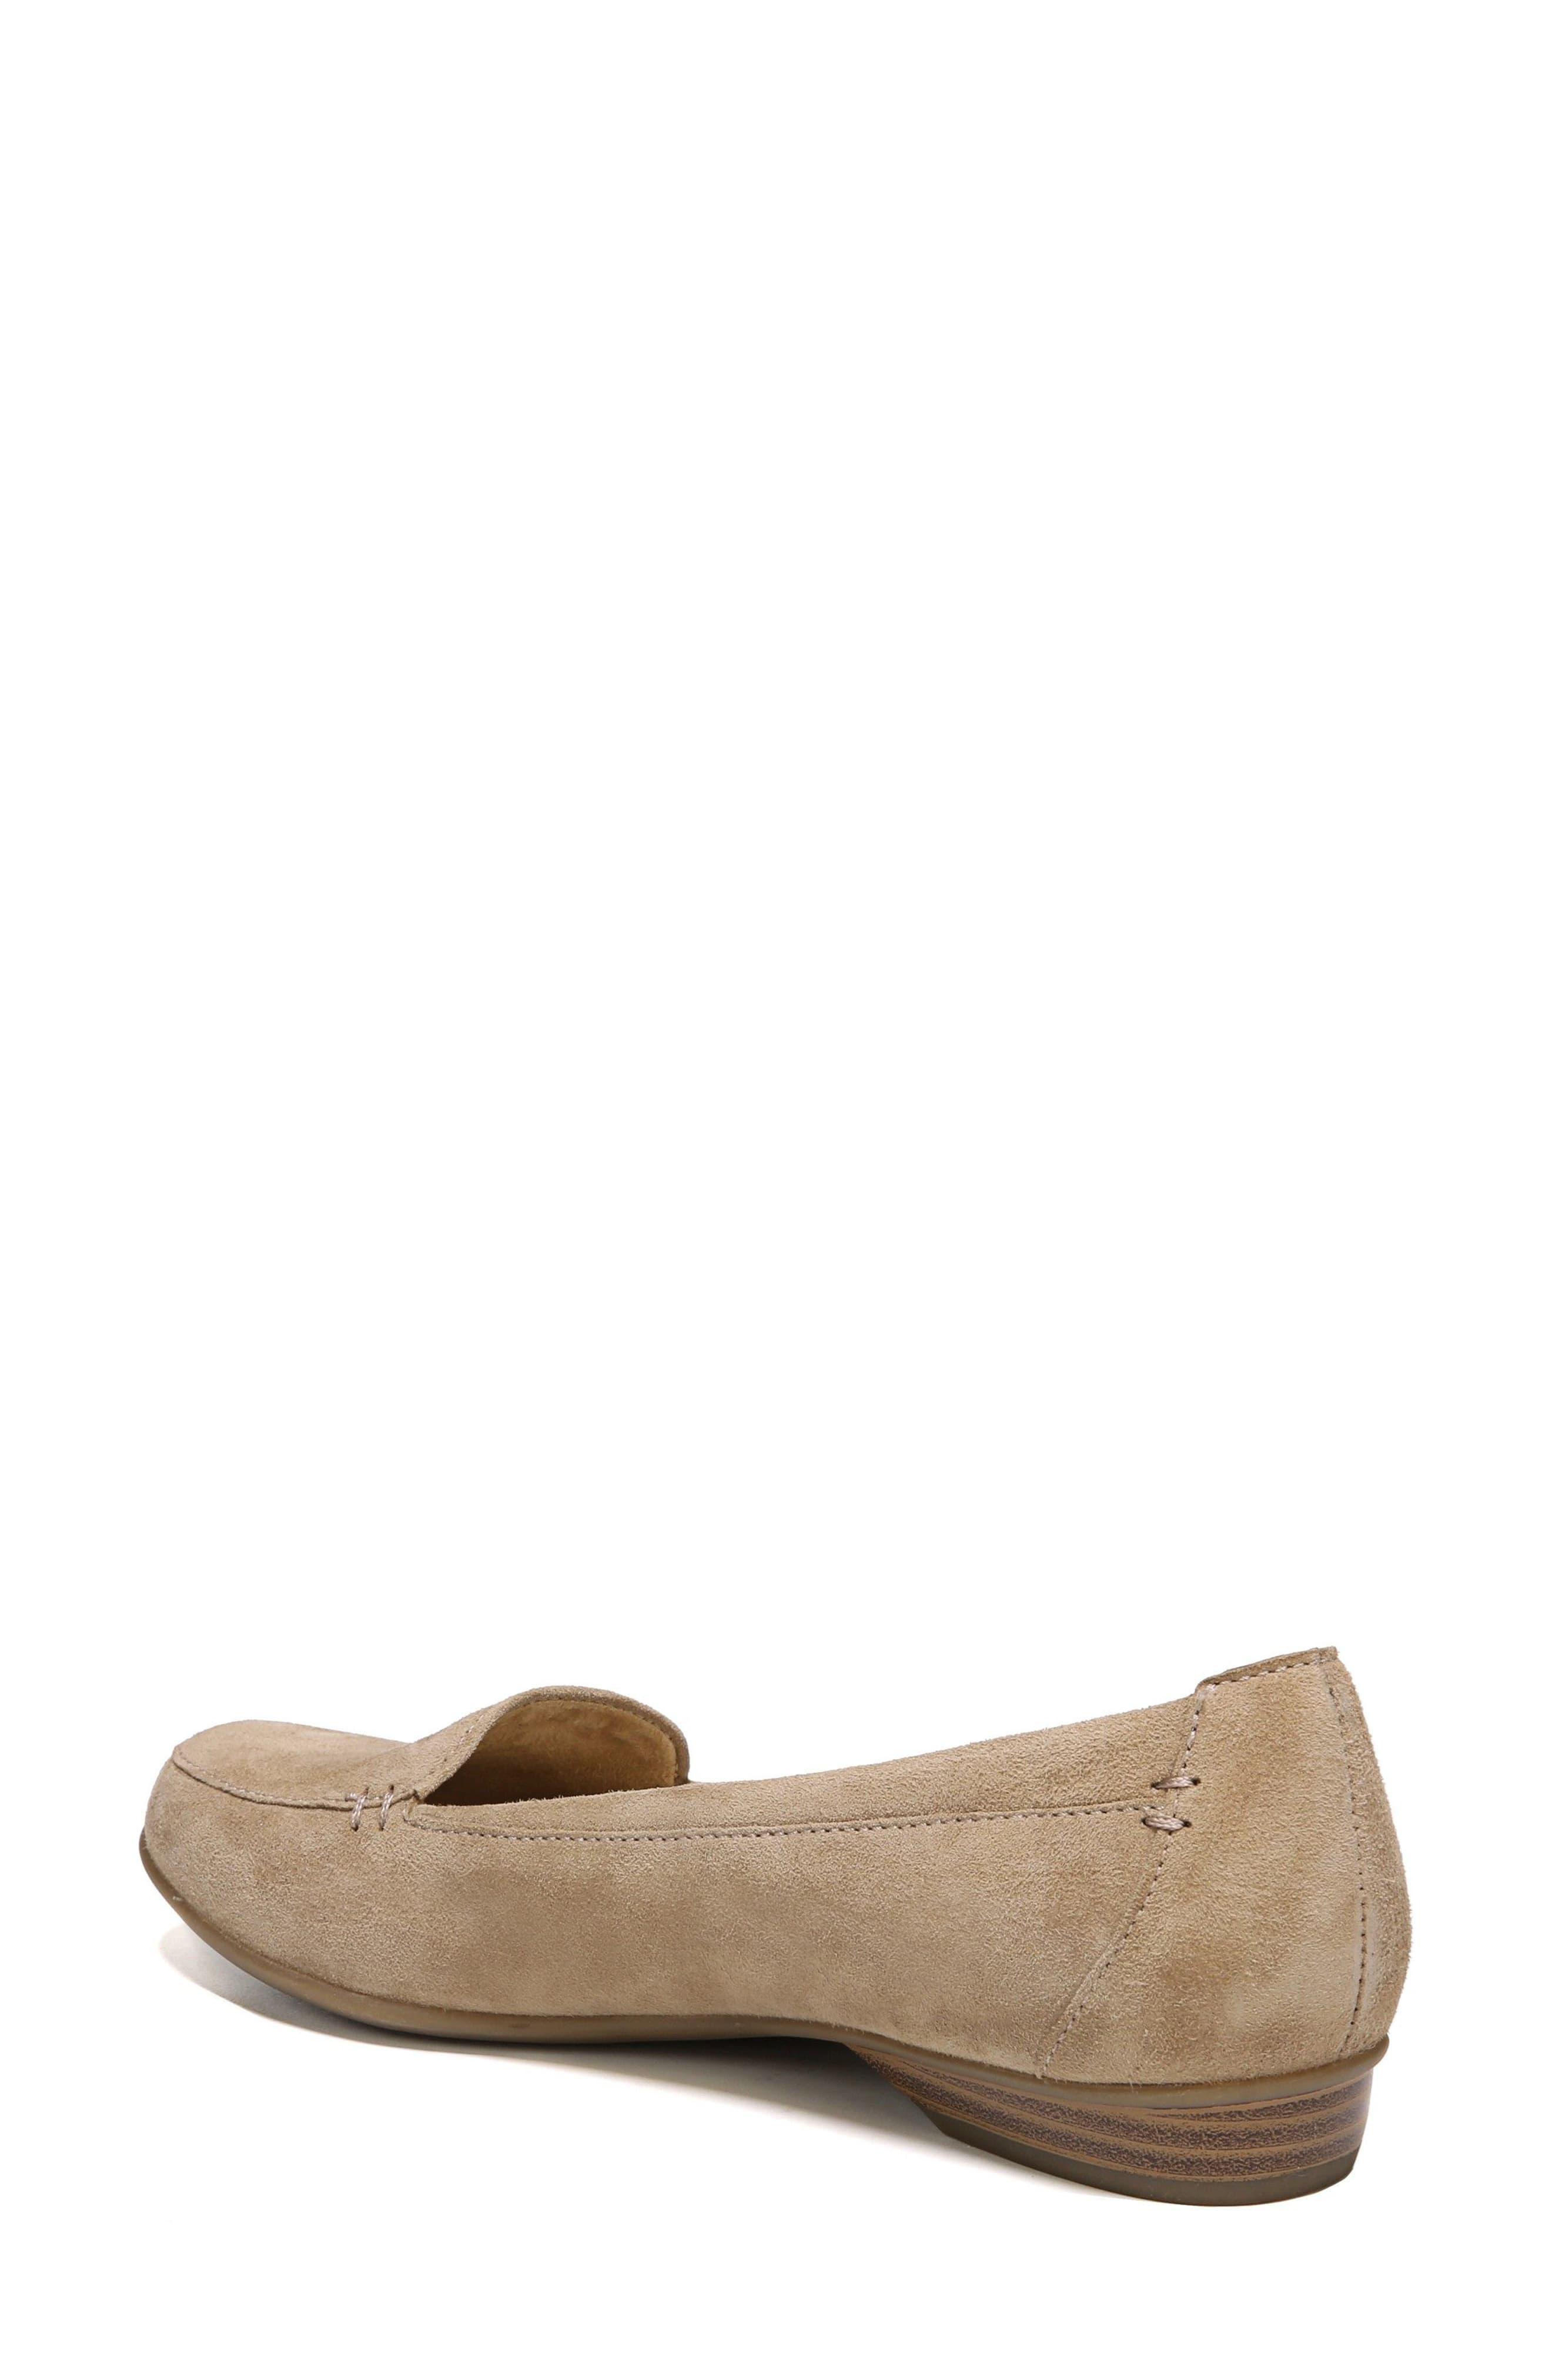 Naturalizer Leather Saban Flats in Oatmeal Suede (Natural) - Save 57% ...